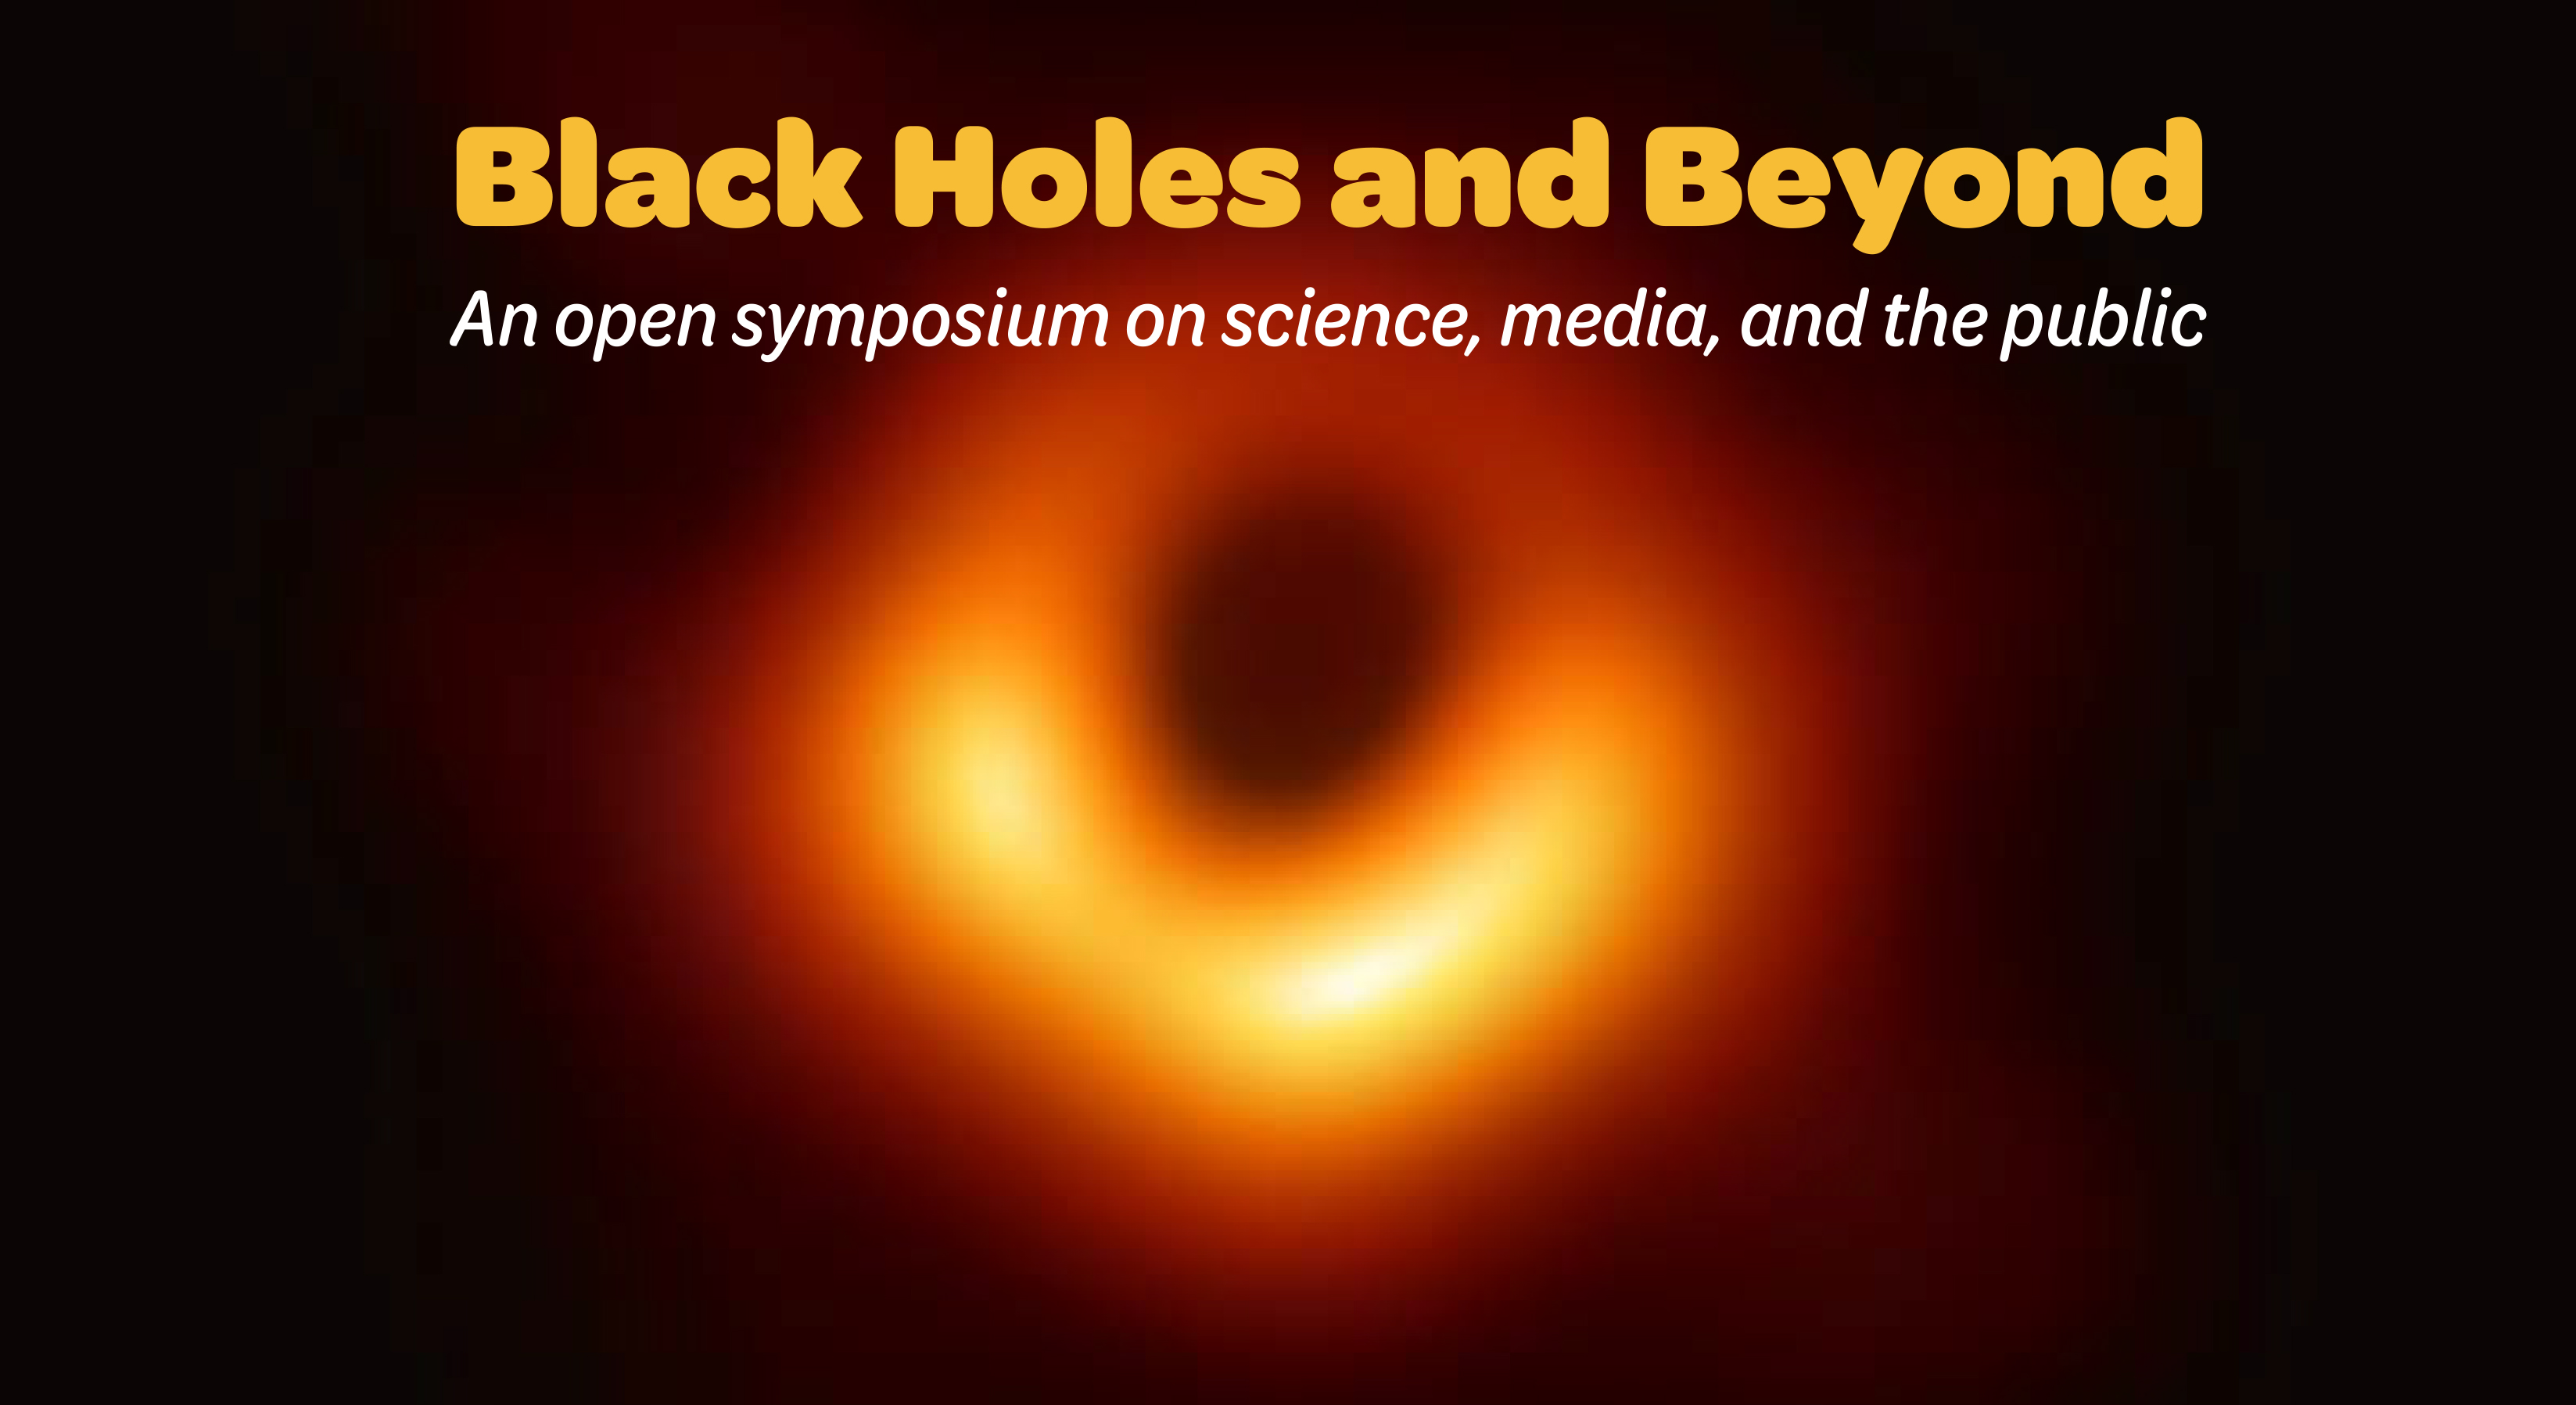 Black Holes and Beyond